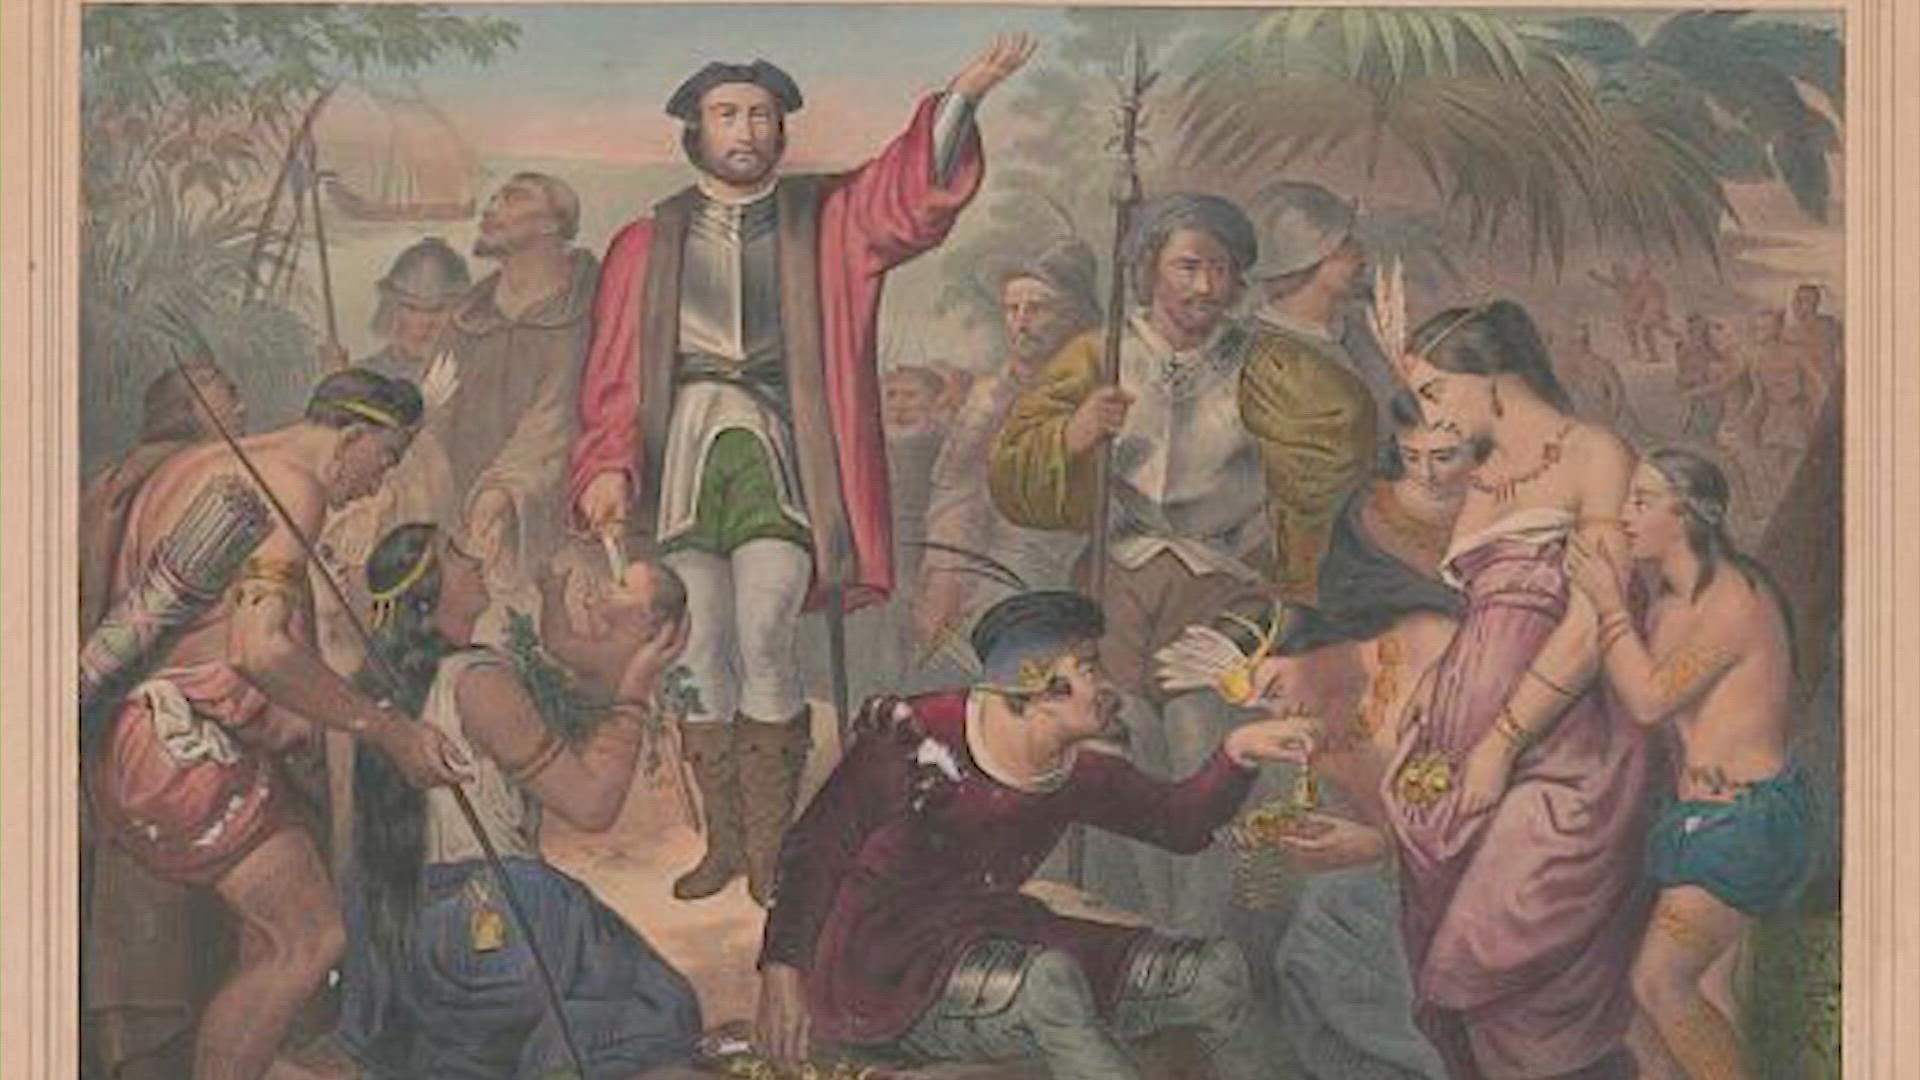 Texas recognizes Columbus Day and Indigenous People's Day. Ron Treviño explains why Columbus' legacy is now a controversial debate.